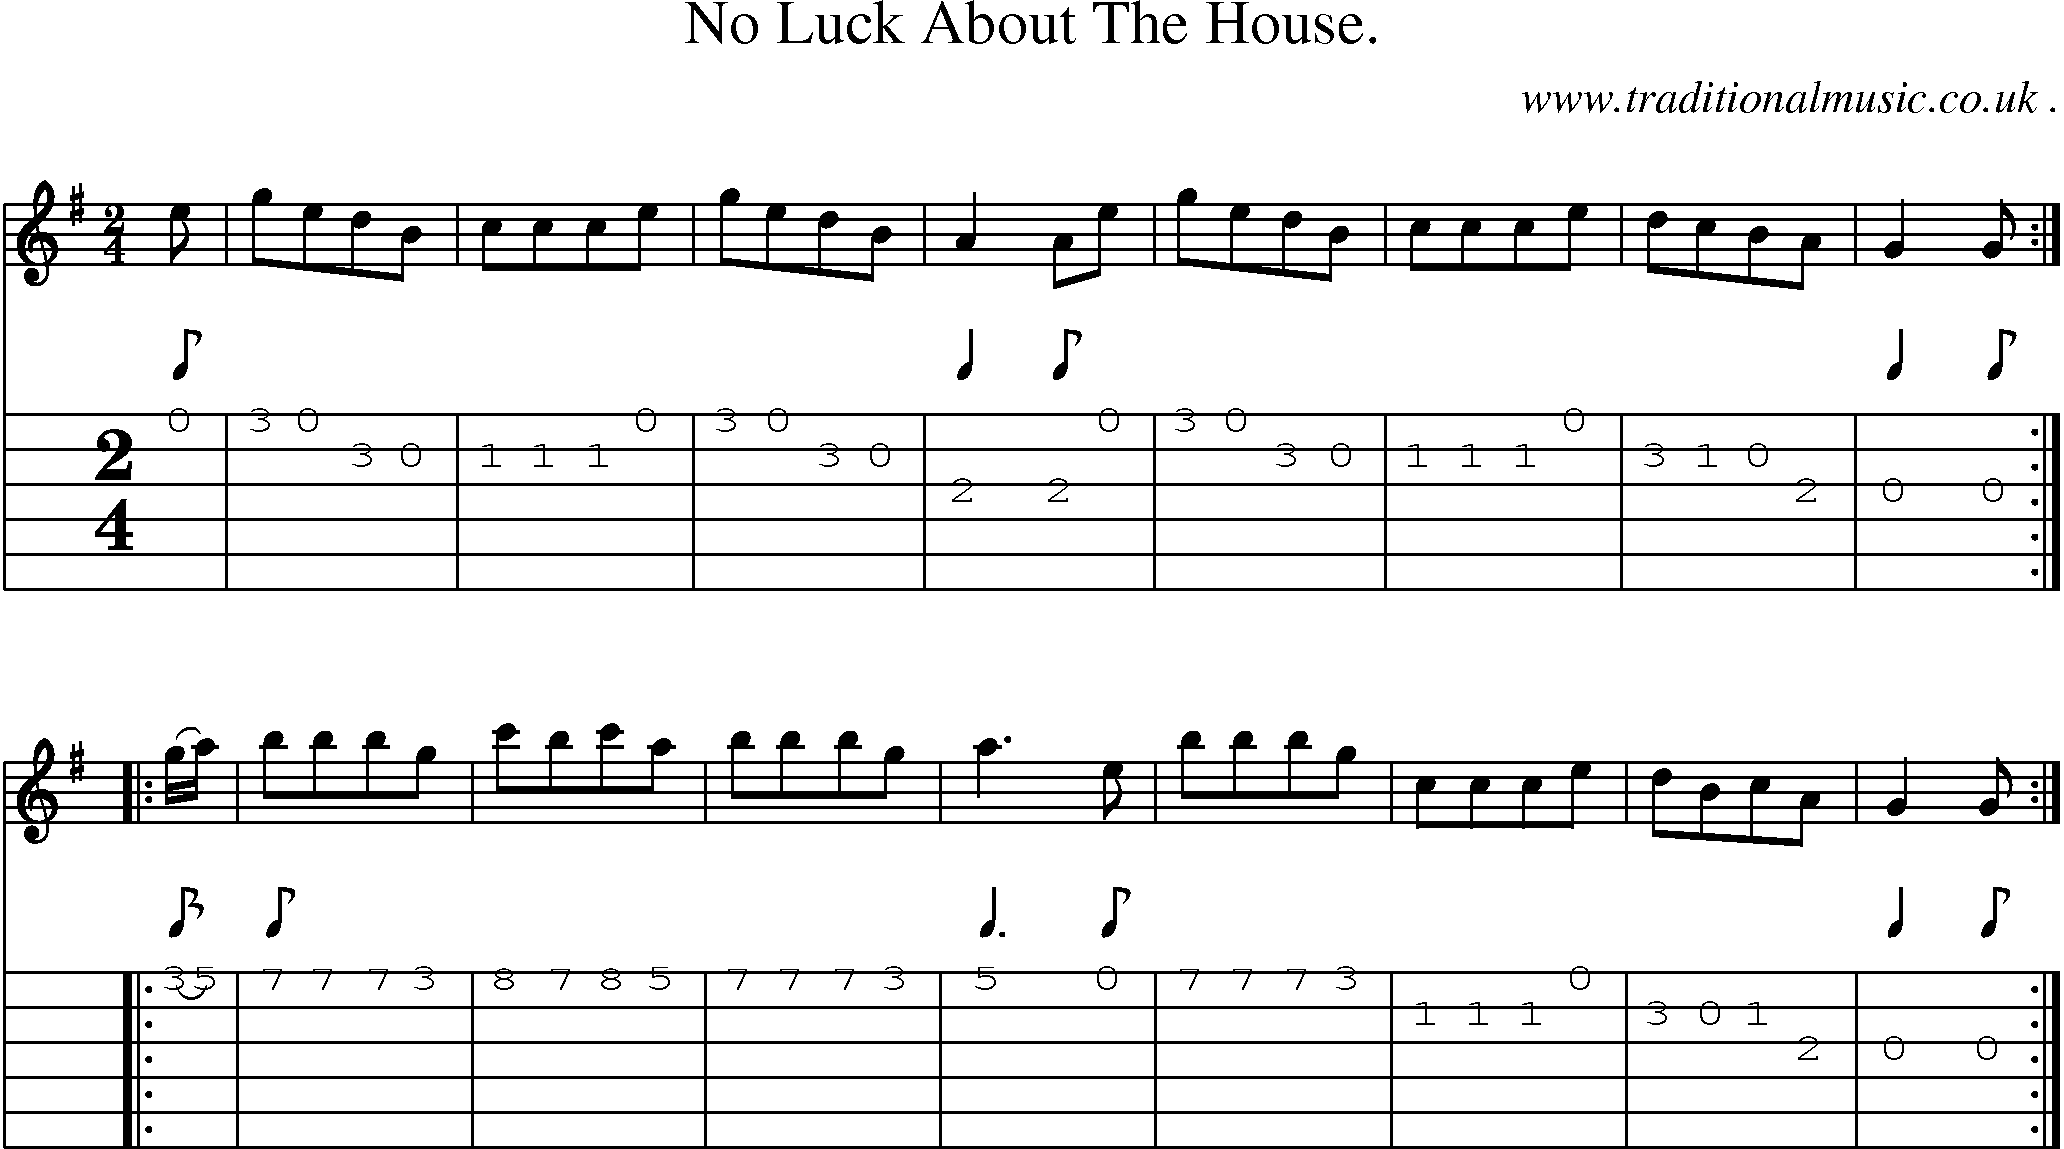 Sheet-Music and Guitar Tabs for No Luck About The House